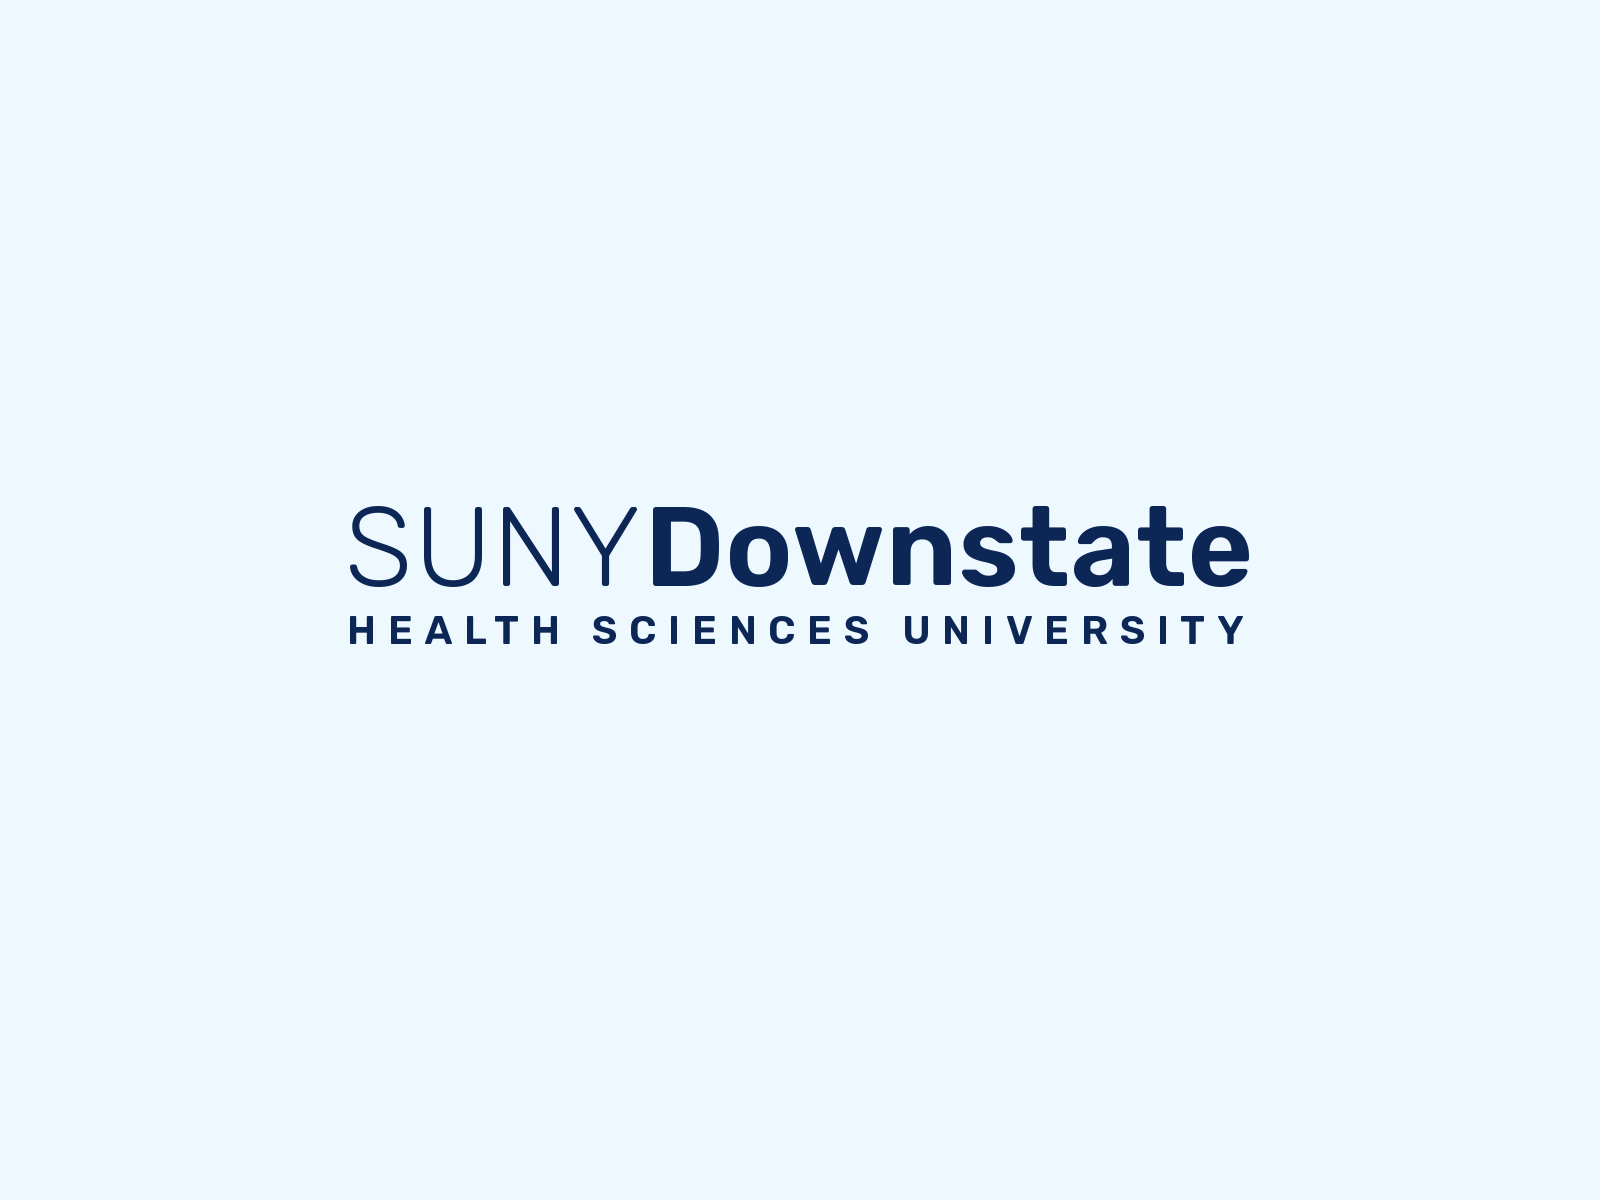 SUNY Downstate Logo by Natalie Callegari on Dribbble